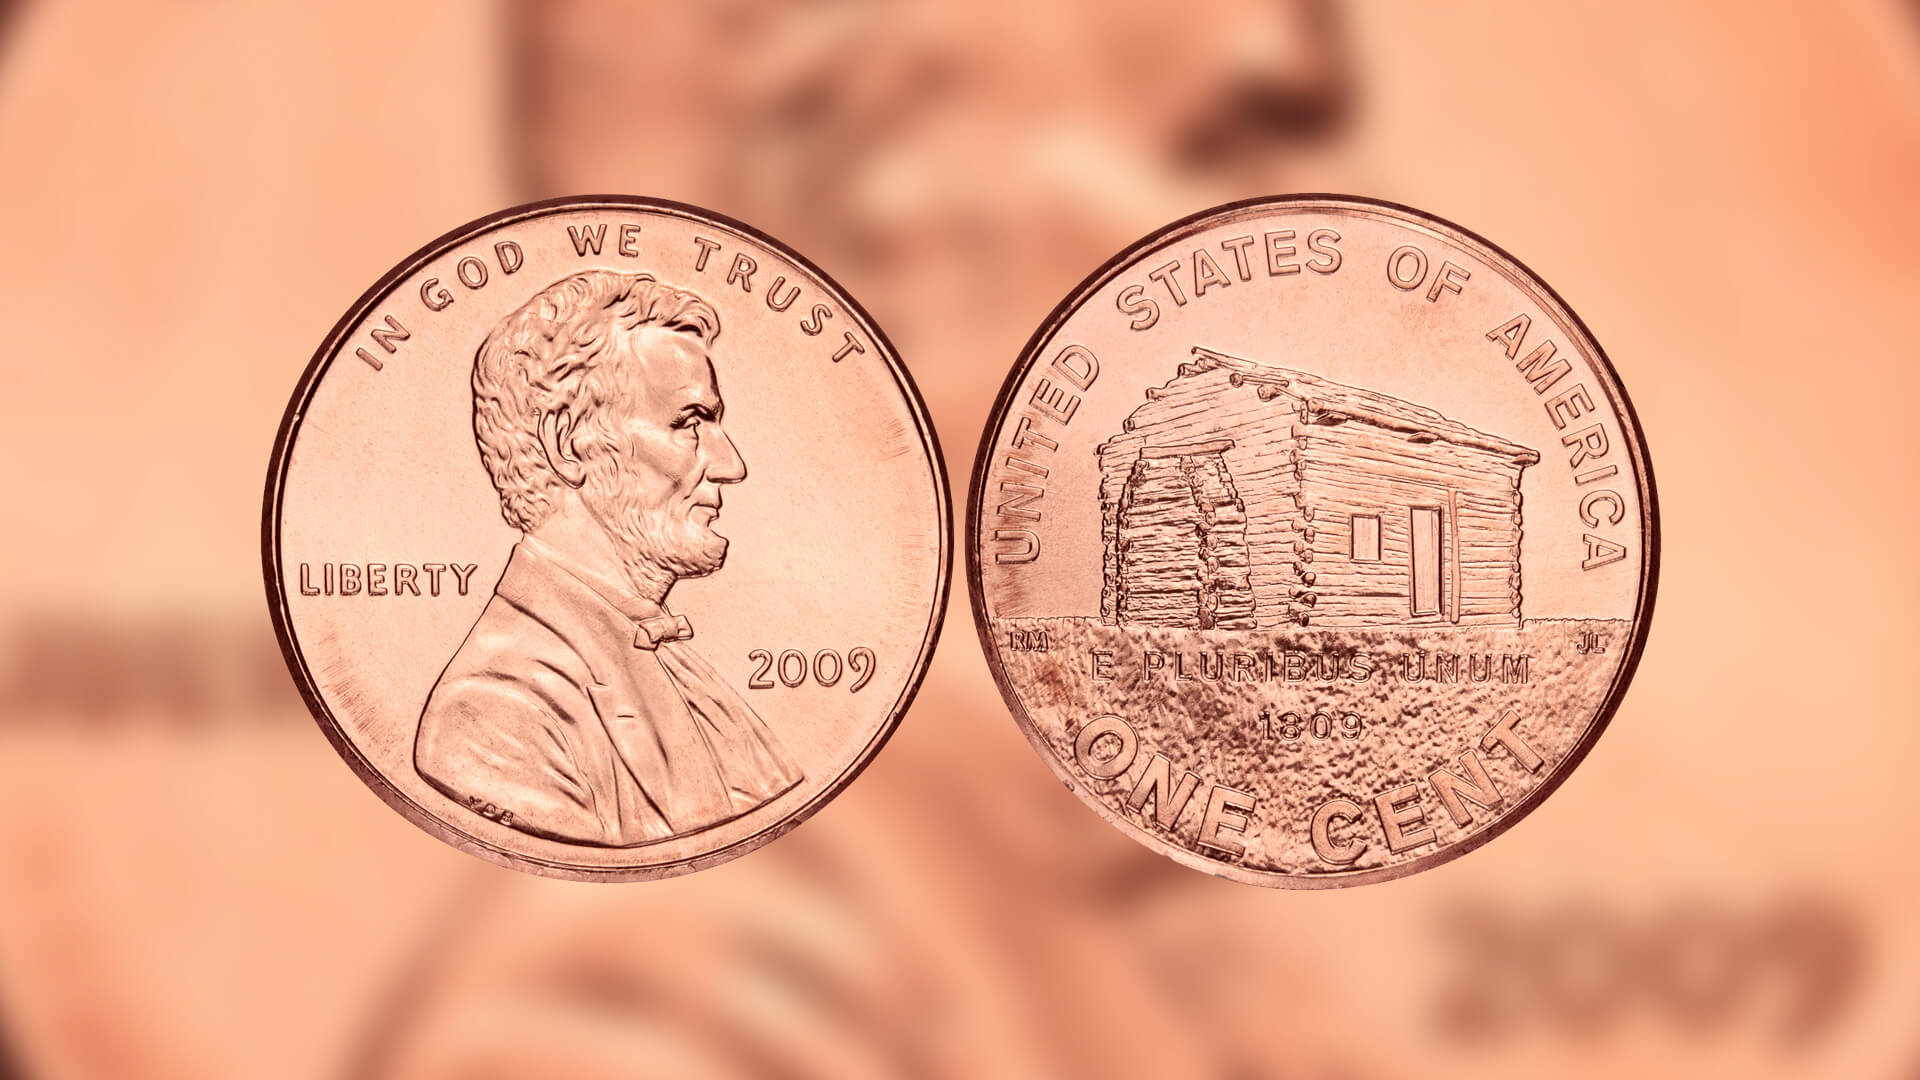 CAC 1919 Lincoln Cent is the New Most Valuable Common Coin